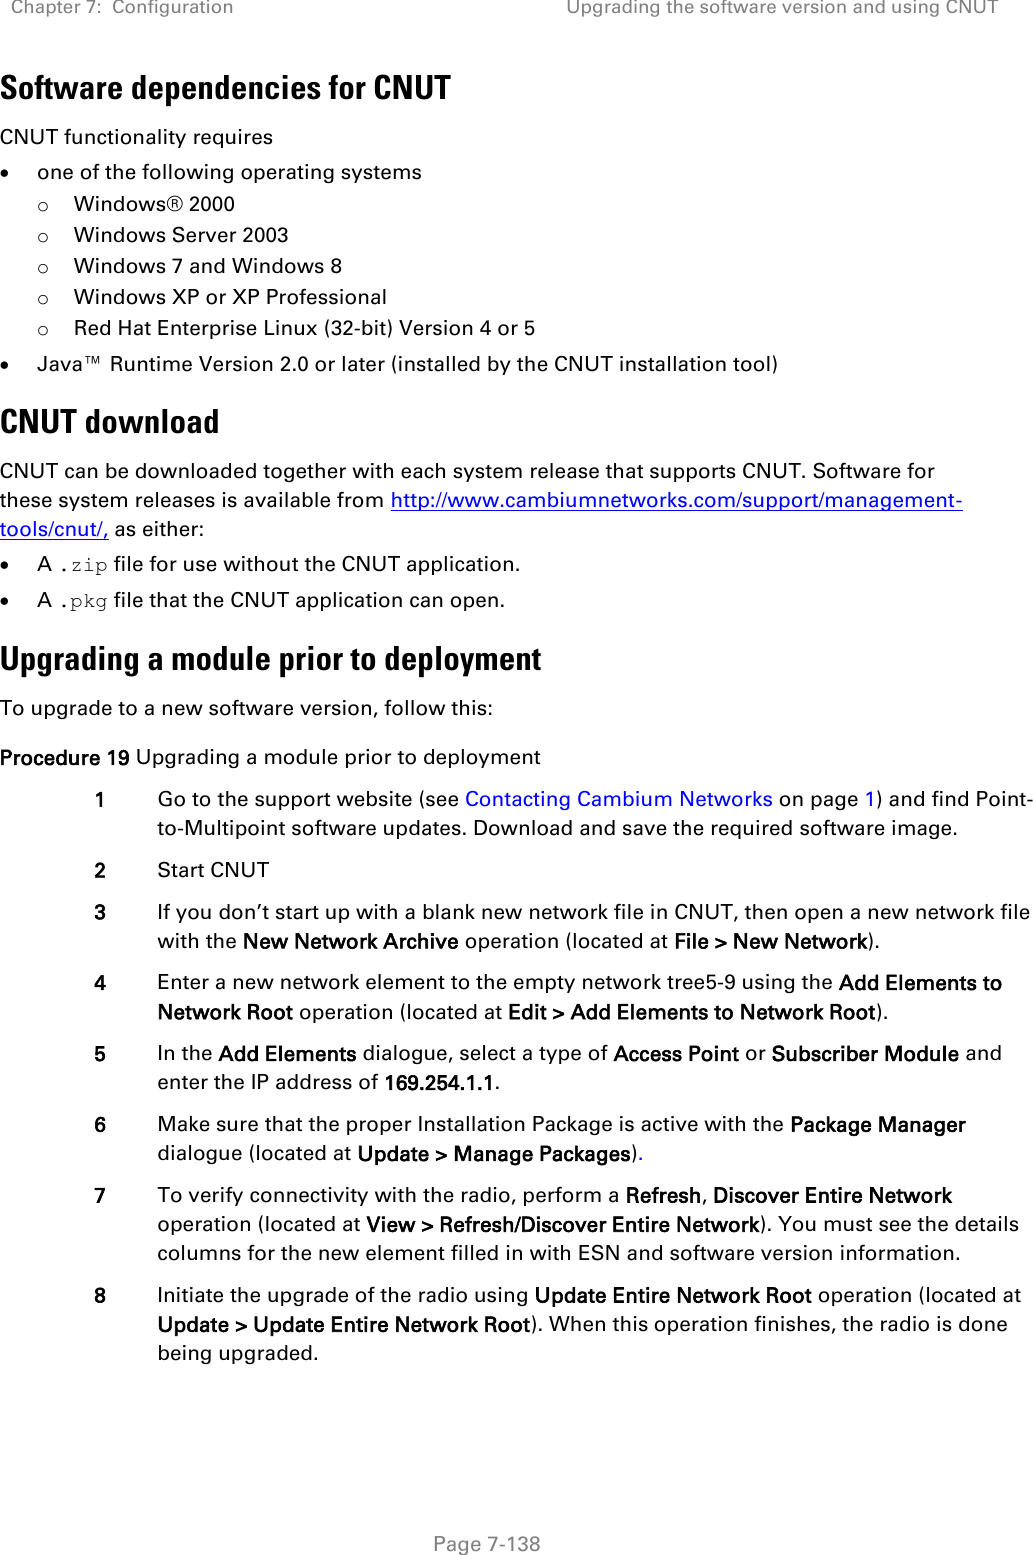 Chapter 7:  Configuration Upgrading the software version and using CNUT   Page 7-138 Software dependencies for CNUT CNUT functionality requires  one of the following operating systems o Windows® 2000 o Windows Server 2003 o Windows 7 and Windows 8 o Windows XP or XP Professional o Red Hat Enterprise Linux (32-bit) Version 4 or 5  Java™ Runtime Version 2.0 or later (installed by the CNUT installation tool) CNUT download CNUT can be downloaded together with each system release that supports CNUT. Software for these system releases is available from http://www.cambiumnetworks.com/support/management-tools/cnut/, as either:  A .zip file for use without the CNUT application.  A .pkg file that the CNUT application can open. Upgrading a module prior to deployment To upgrade to a new software version, follow this: Procedure 19 Upgrading a module prior to deployment 1 Go to the support website (see Contacting Cambium Networks on page 1) and find Point-to-Multipoint software updates. Download and save the required software image. 2 Start CNUT 3 If you don’t start up with a blank new network file in CNUT, then open a new network file with the New Network Archive operation (located at File &gt; New Network). 4 Enter a new network element to the empty network tree5-9 using the Add Elements to Network Root operation (located at Edit &gt; Add Elements to Network Root). 5 In the Add Elements dialogue, select a type of Access Point or Subscriber Module and enter the IP address of 169.254.1.1. 6 Make sure that the proper Installation Package is active with the Package Manager dialogue (located at Update &gt; Manage Packages). 7 To verify connectivity with the radio, perform a Refresh, Discover Entire Network operation (located at View &gt; Refresh/Discover Entire Network). You must see the details columns for the new element filled in with ESN and software version information. 8 Initiate the upgrade of the radio using Update Entire Network Root operation (located at Update &gt; Update Entire Network Root). When this operation finishes, the radio is done being upgraded. 